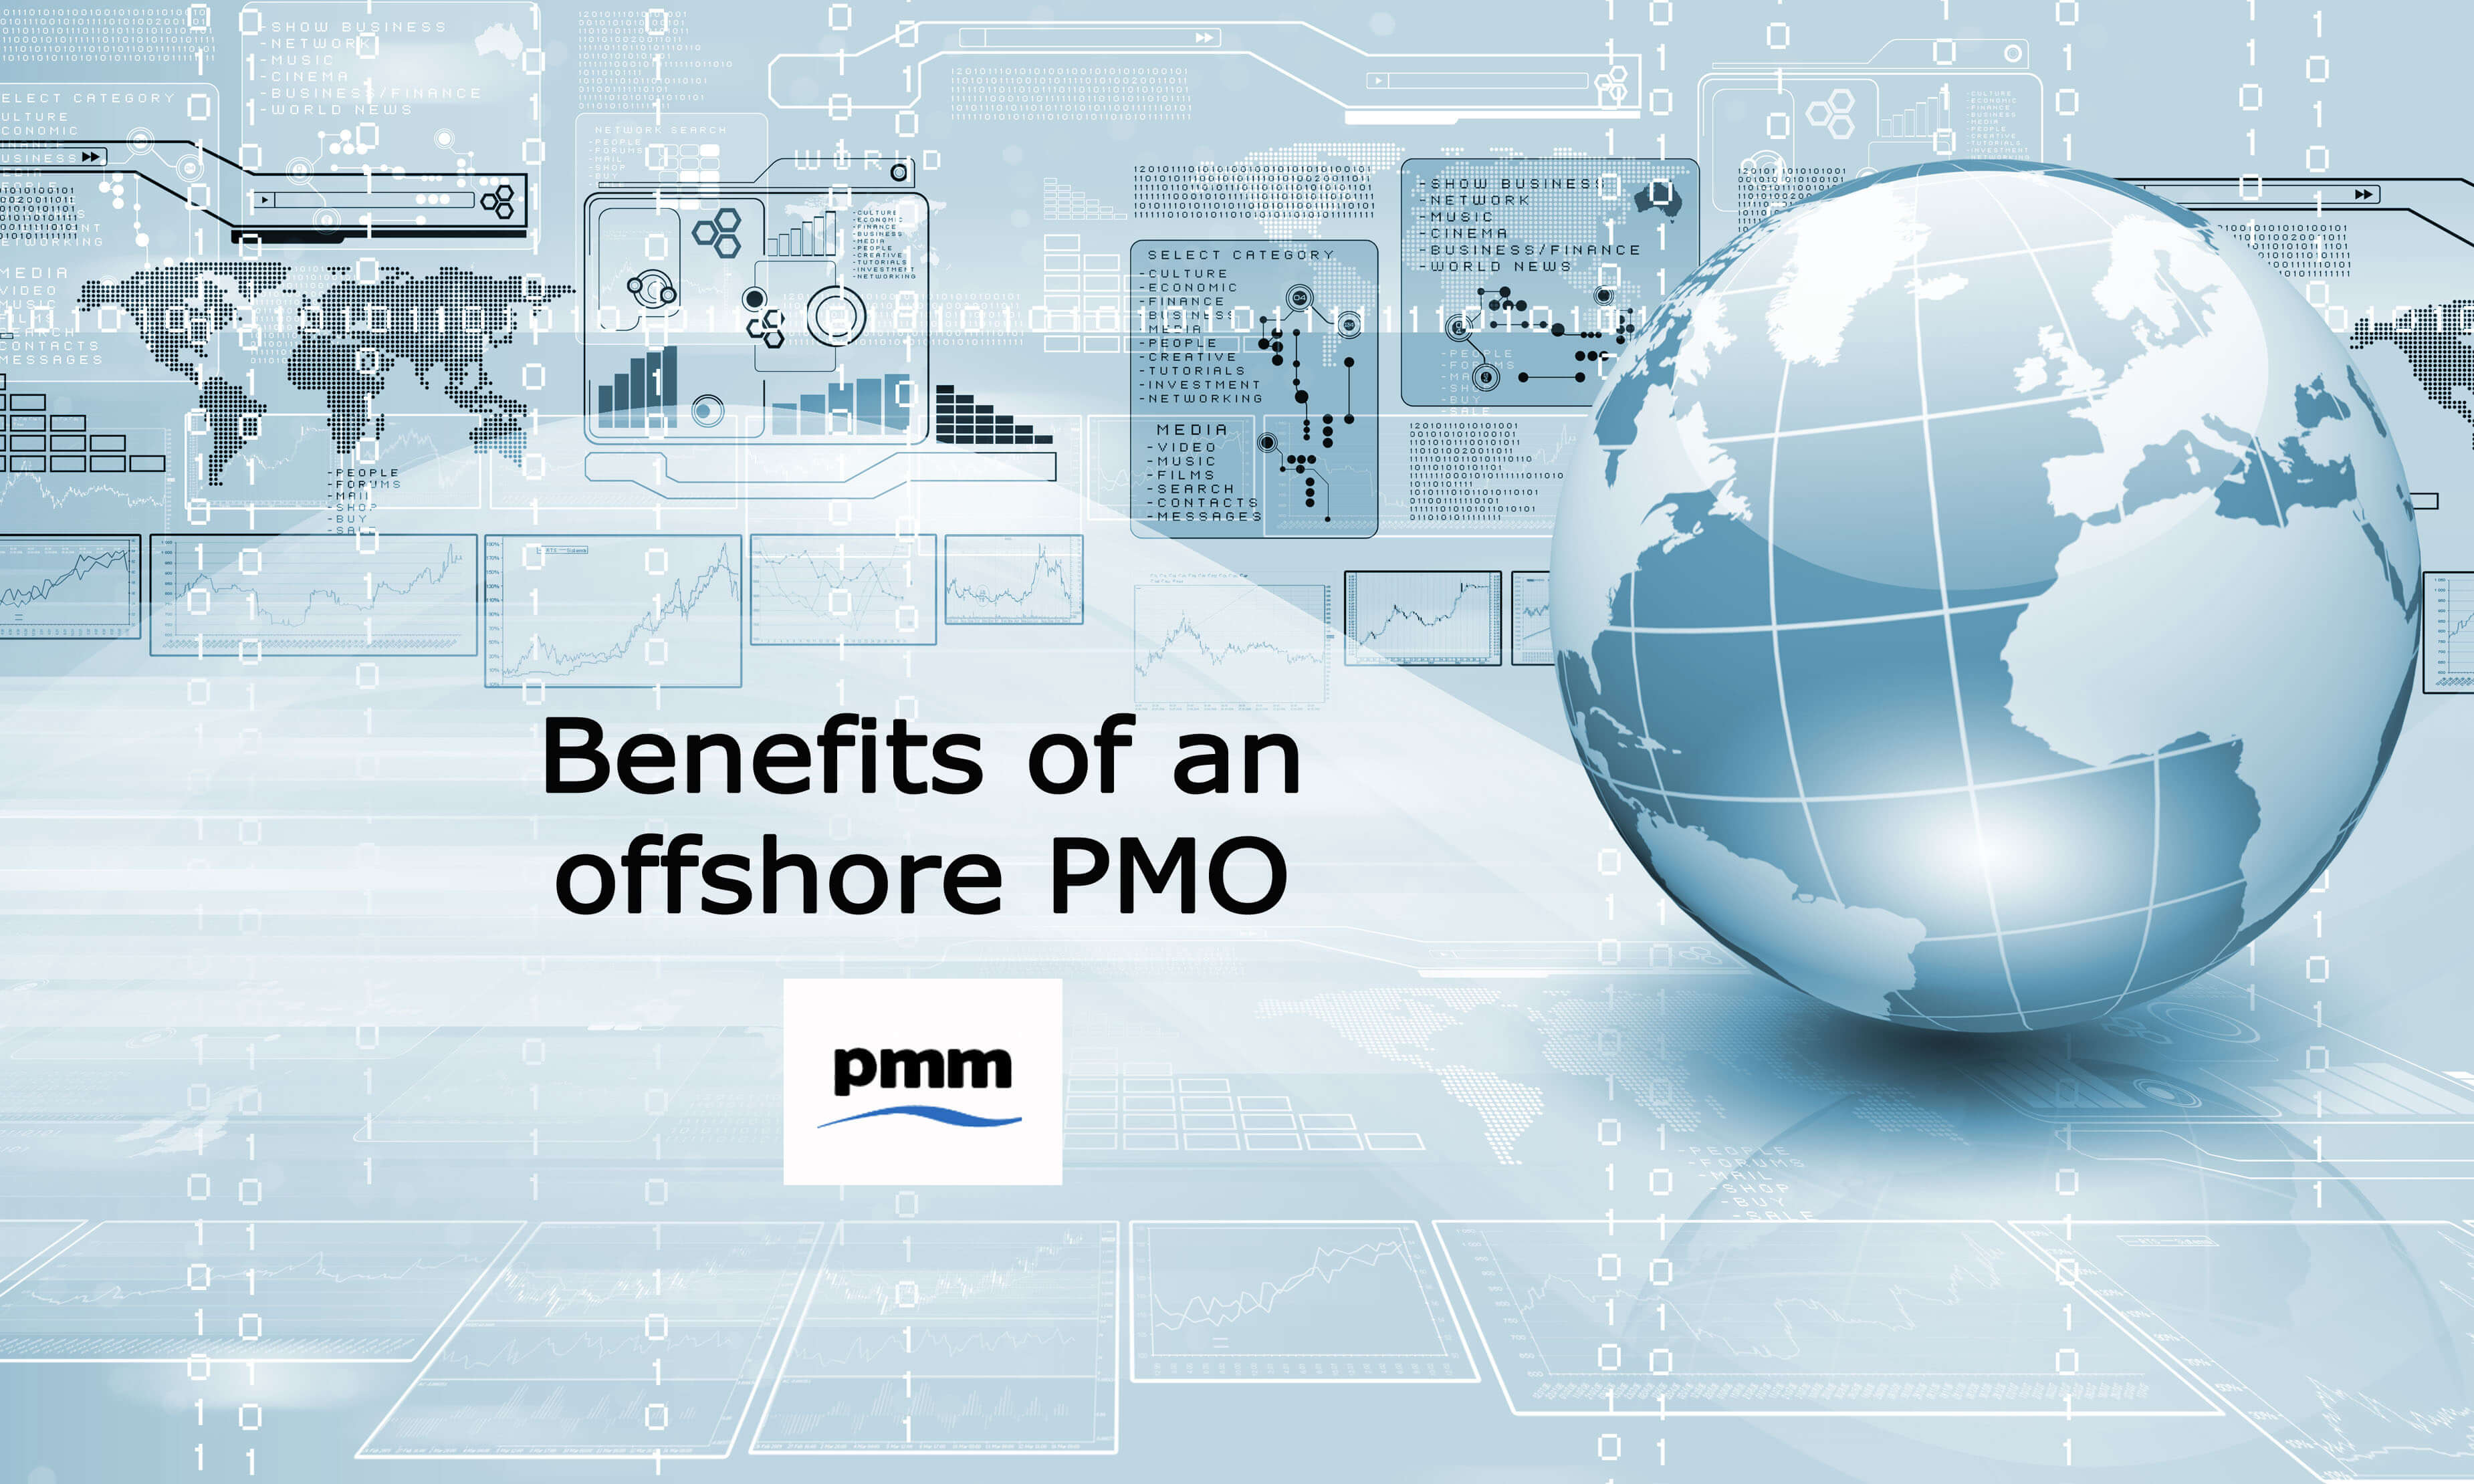 Benefits of an offshore PMO model